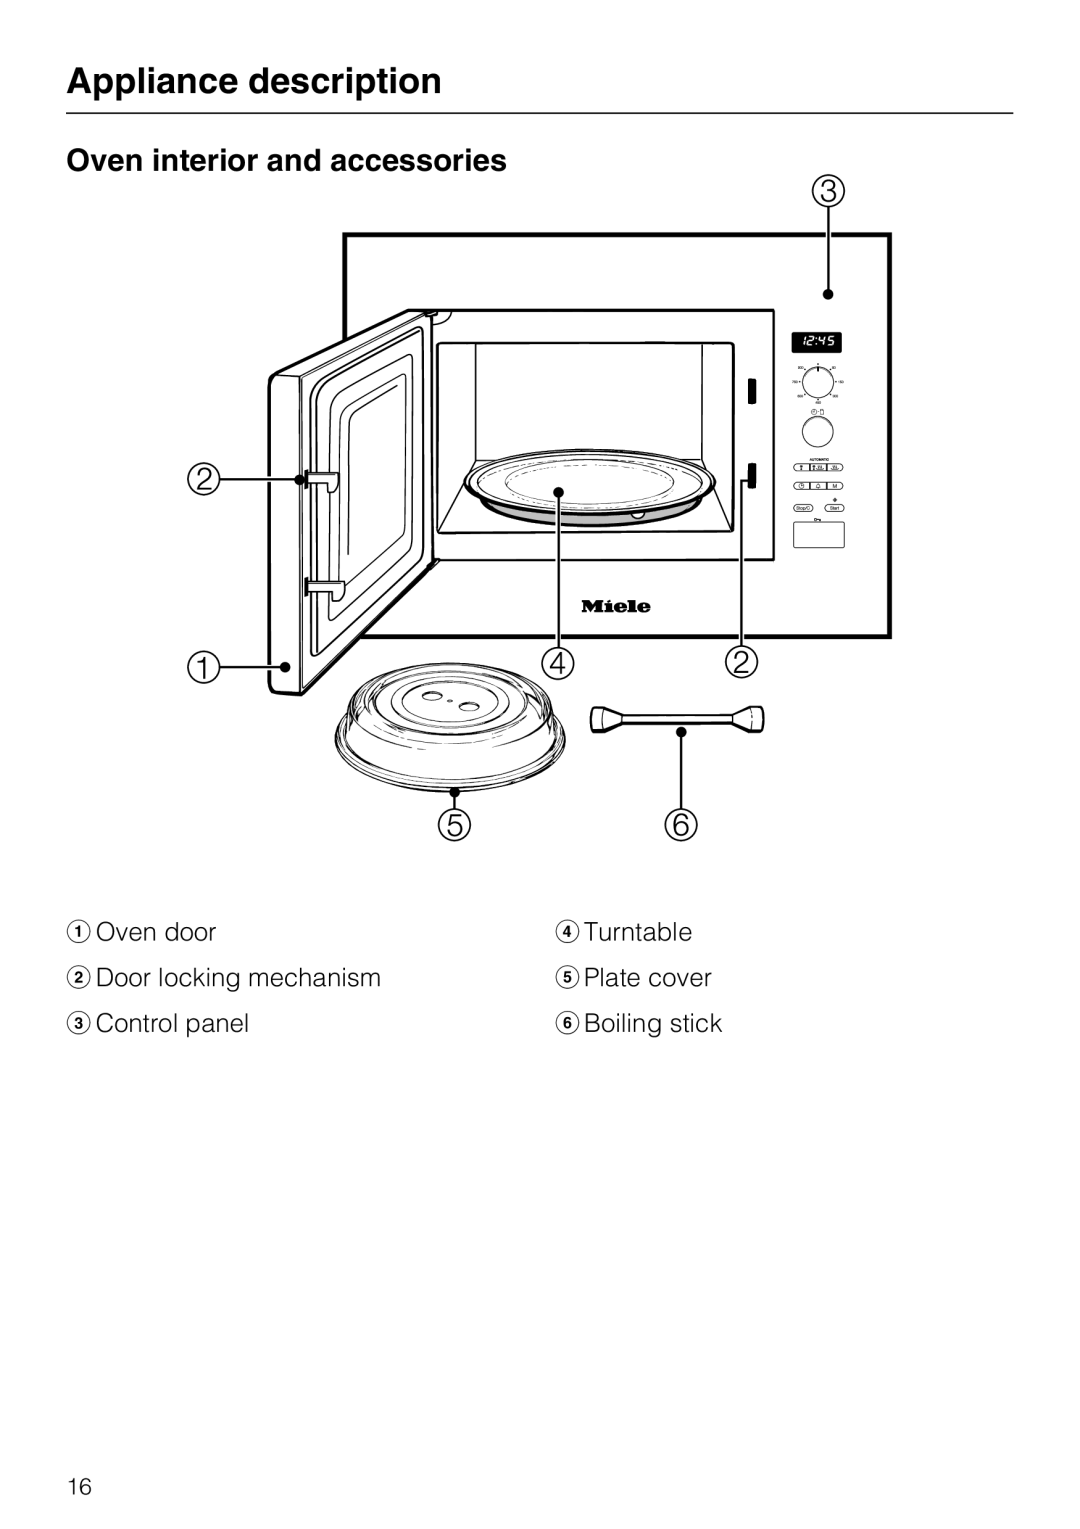 Miele 09 798 350 installation instructions Appliance description, Oven interior and accessories 